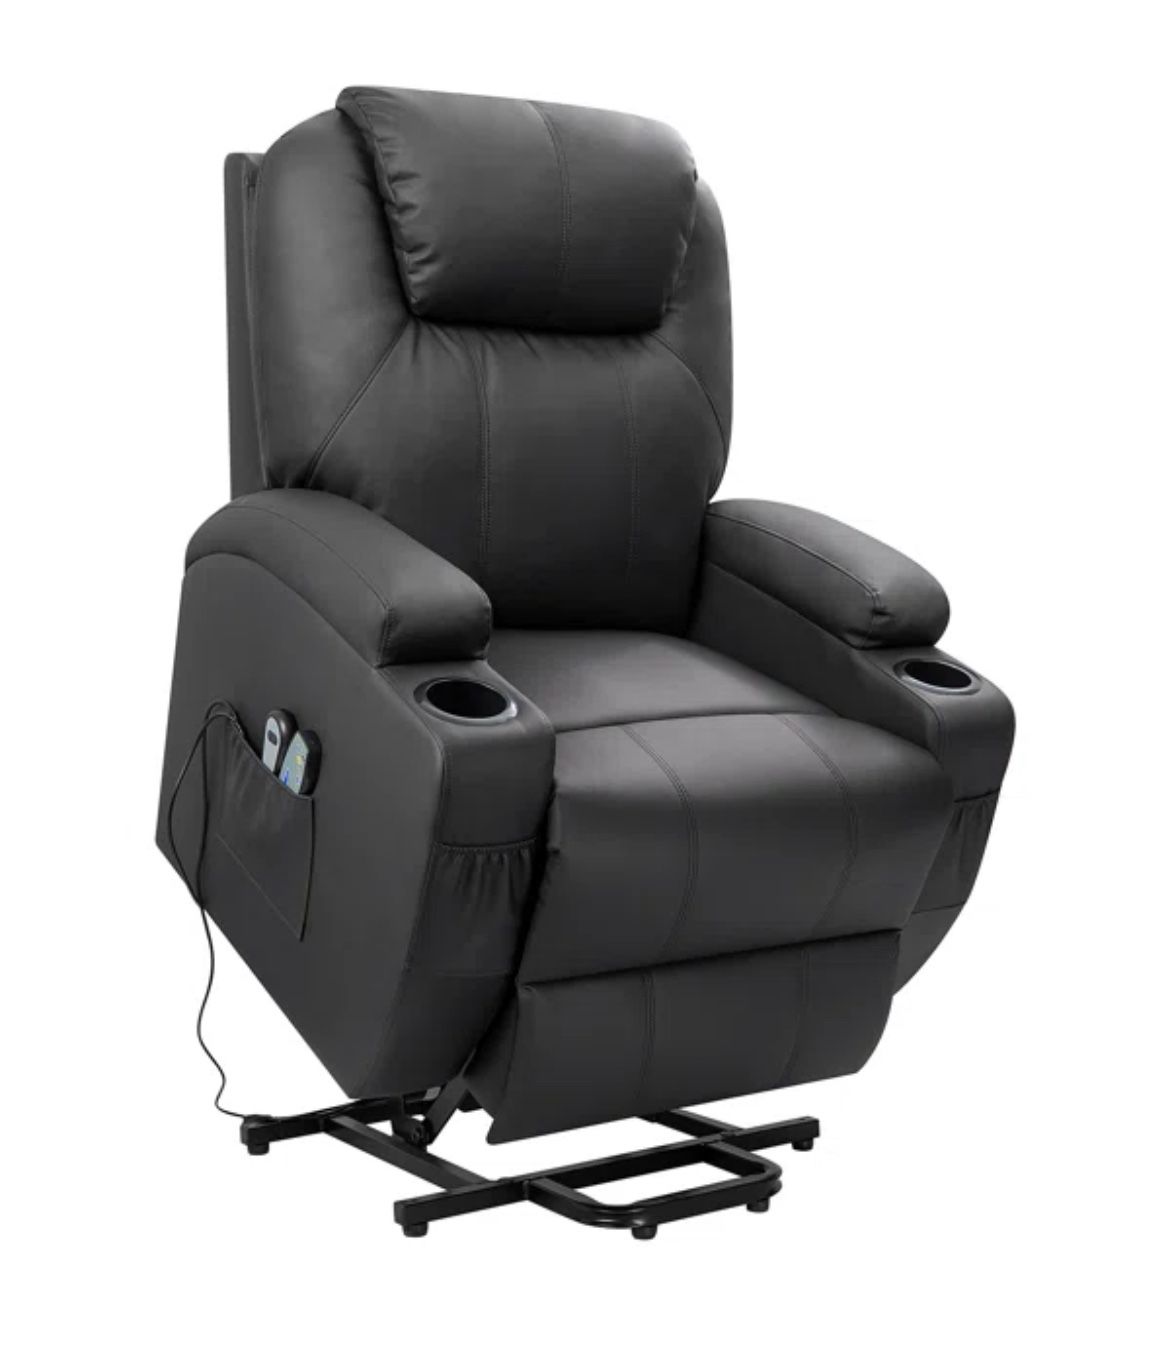 PENDING Faux Leather Power Lift Recliner Chair with Massage and Heating Functions